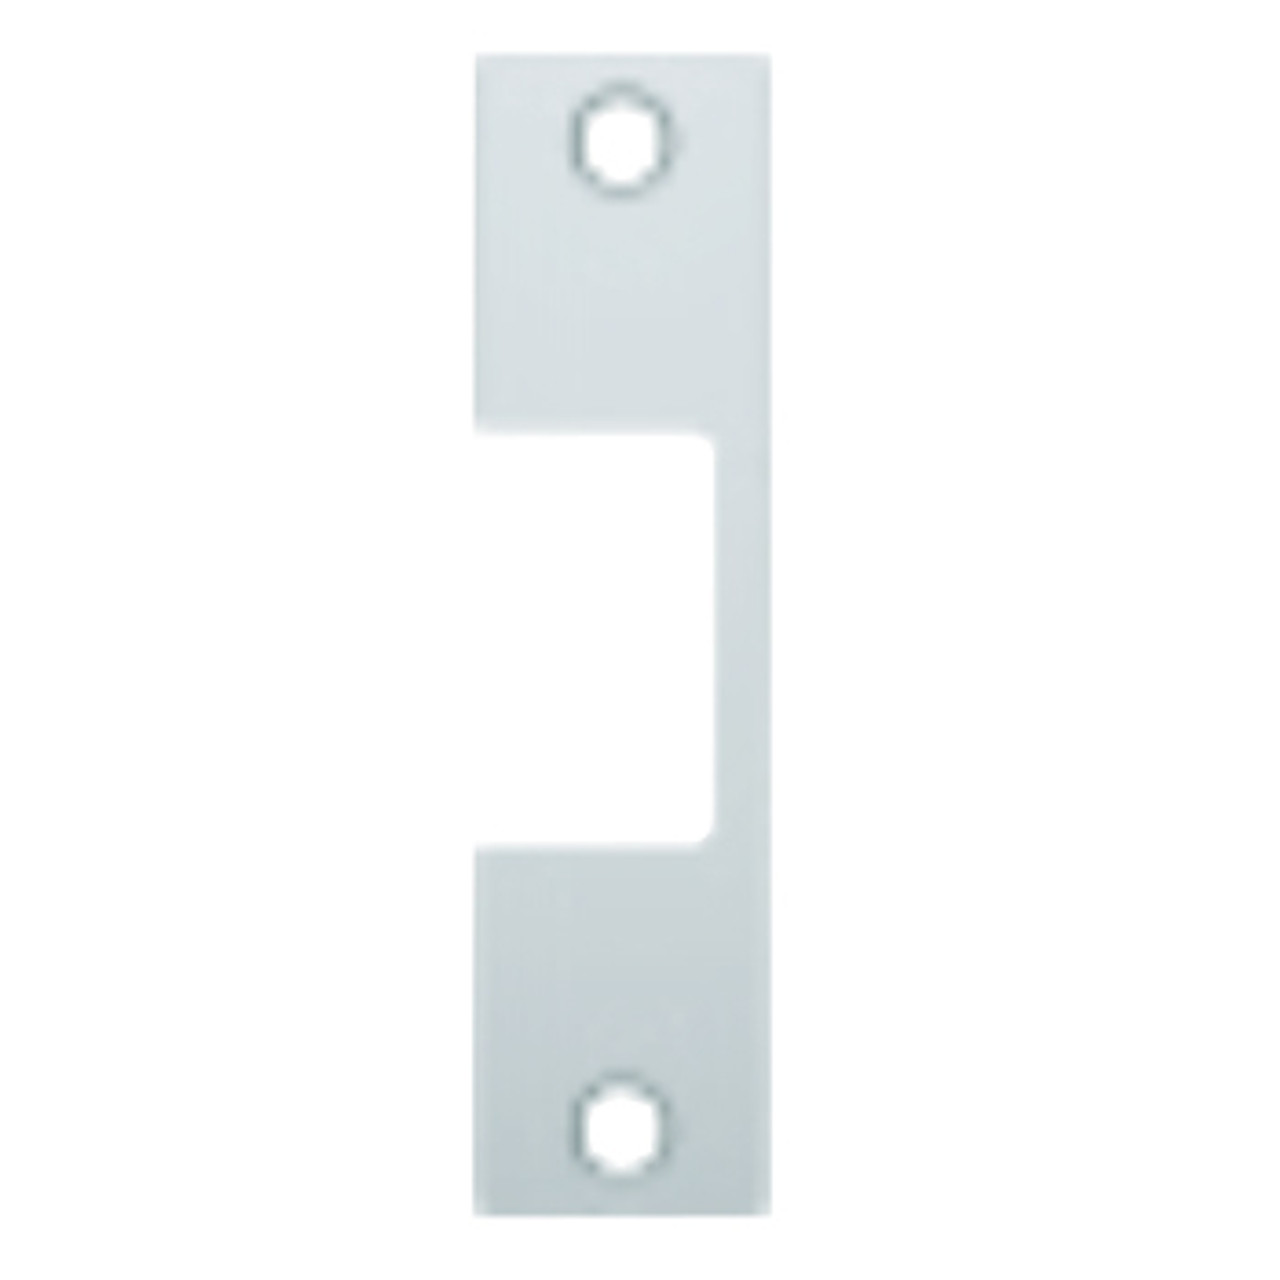 R-629 Hes 4-7/8" x 1-1/4" Faceplate in Bright Stainless Steel Finish